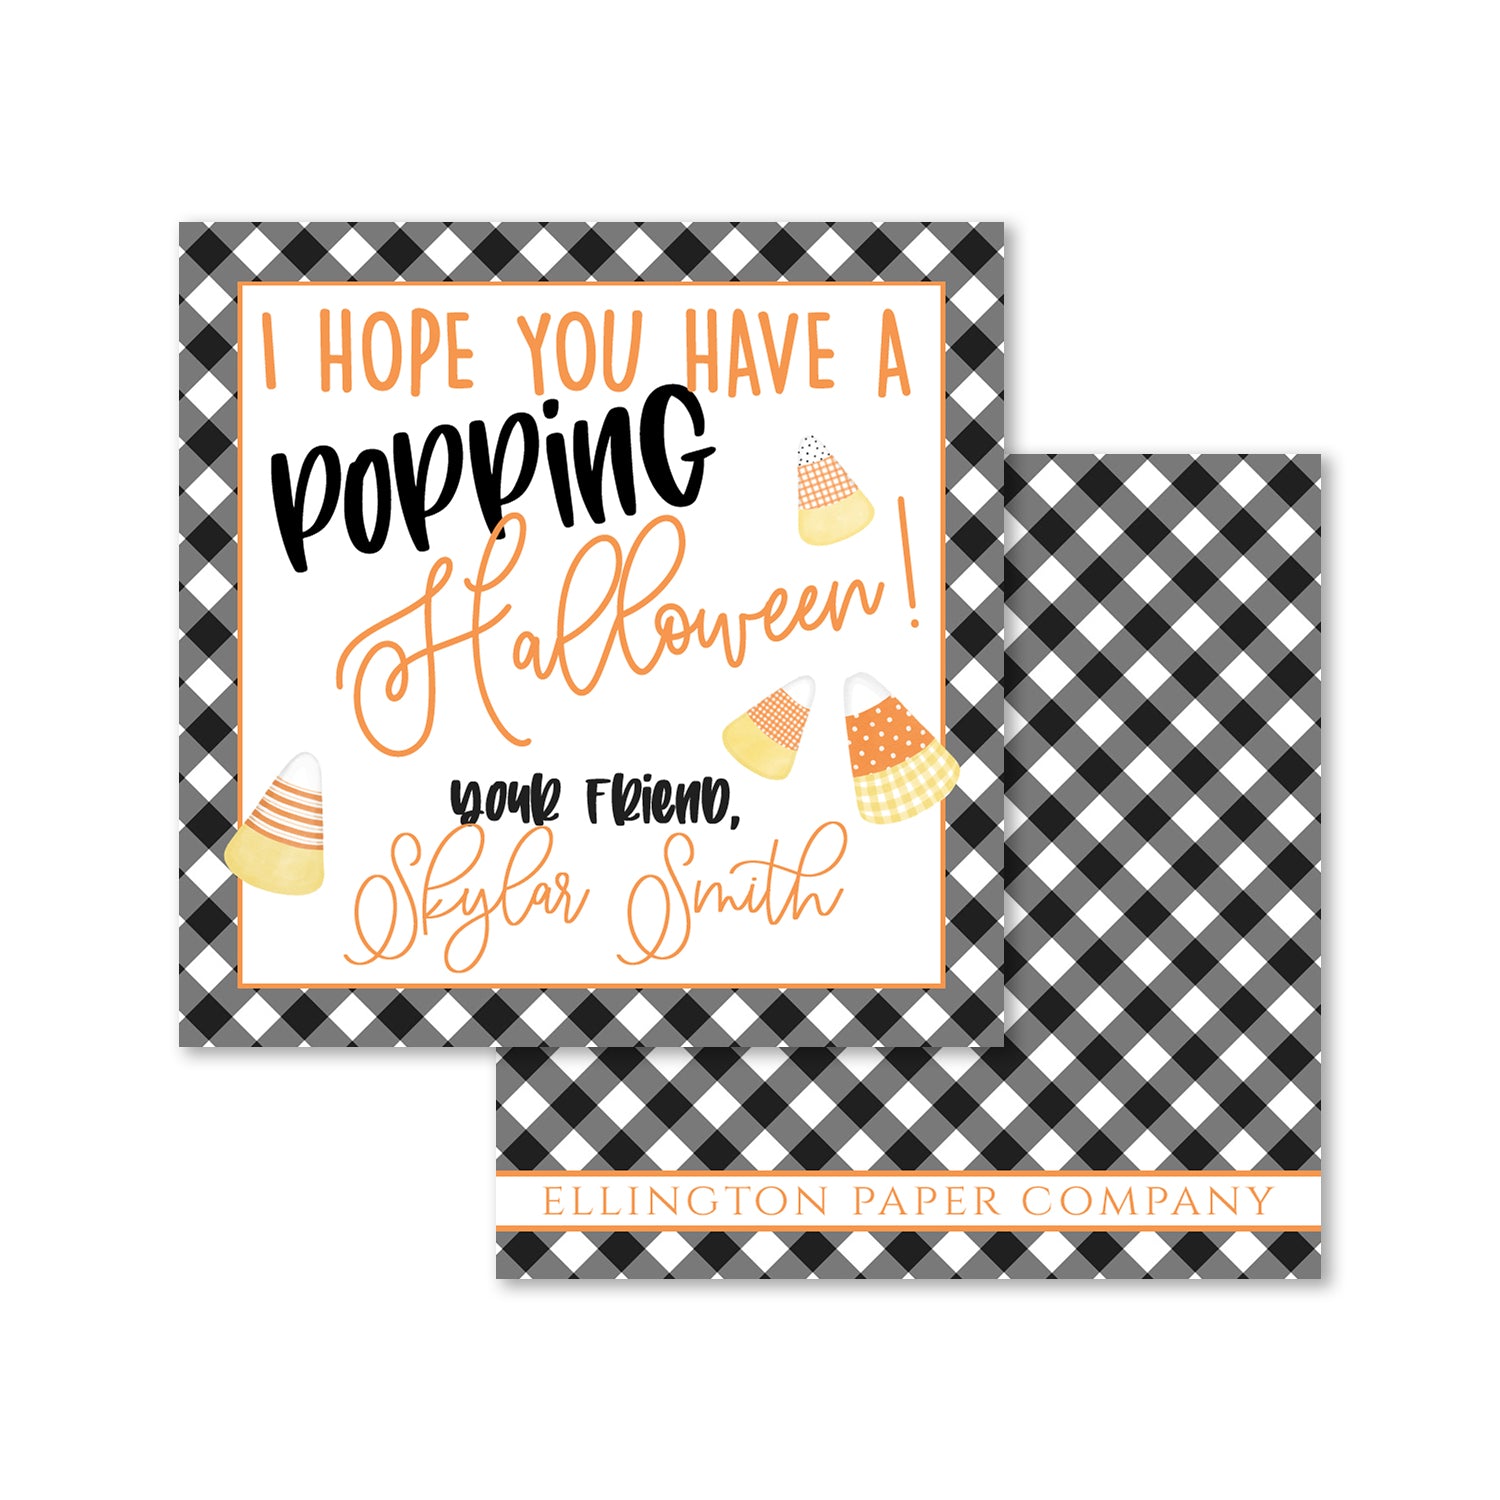 Popping Halloween Enclosure Cards and Stickers